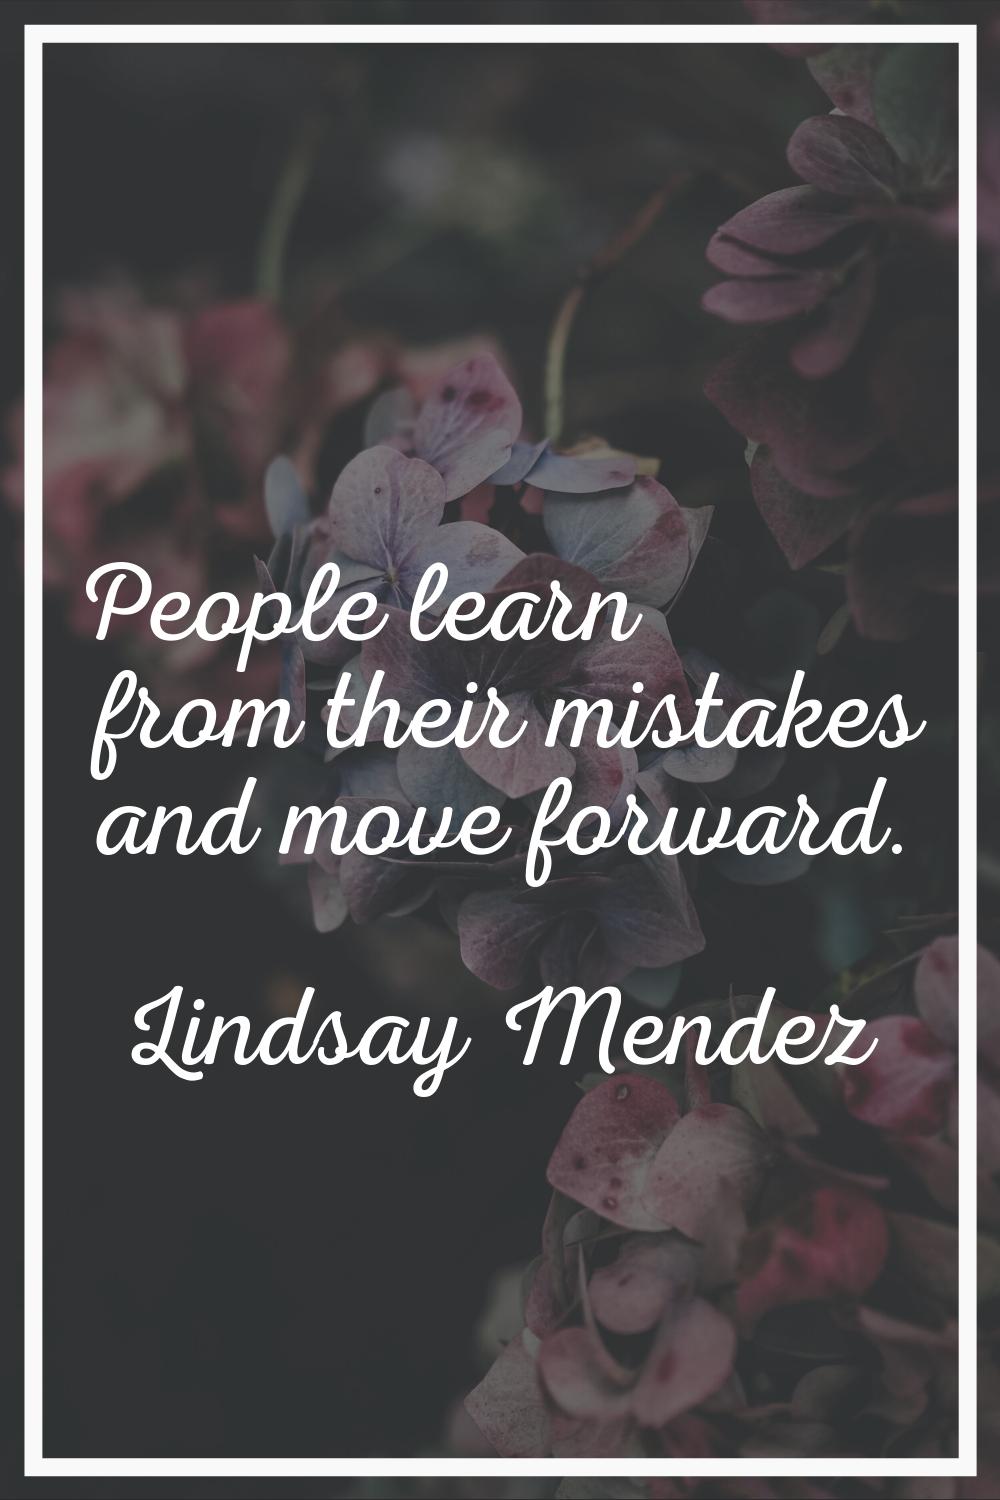 People learn from their mistakes and move forward.